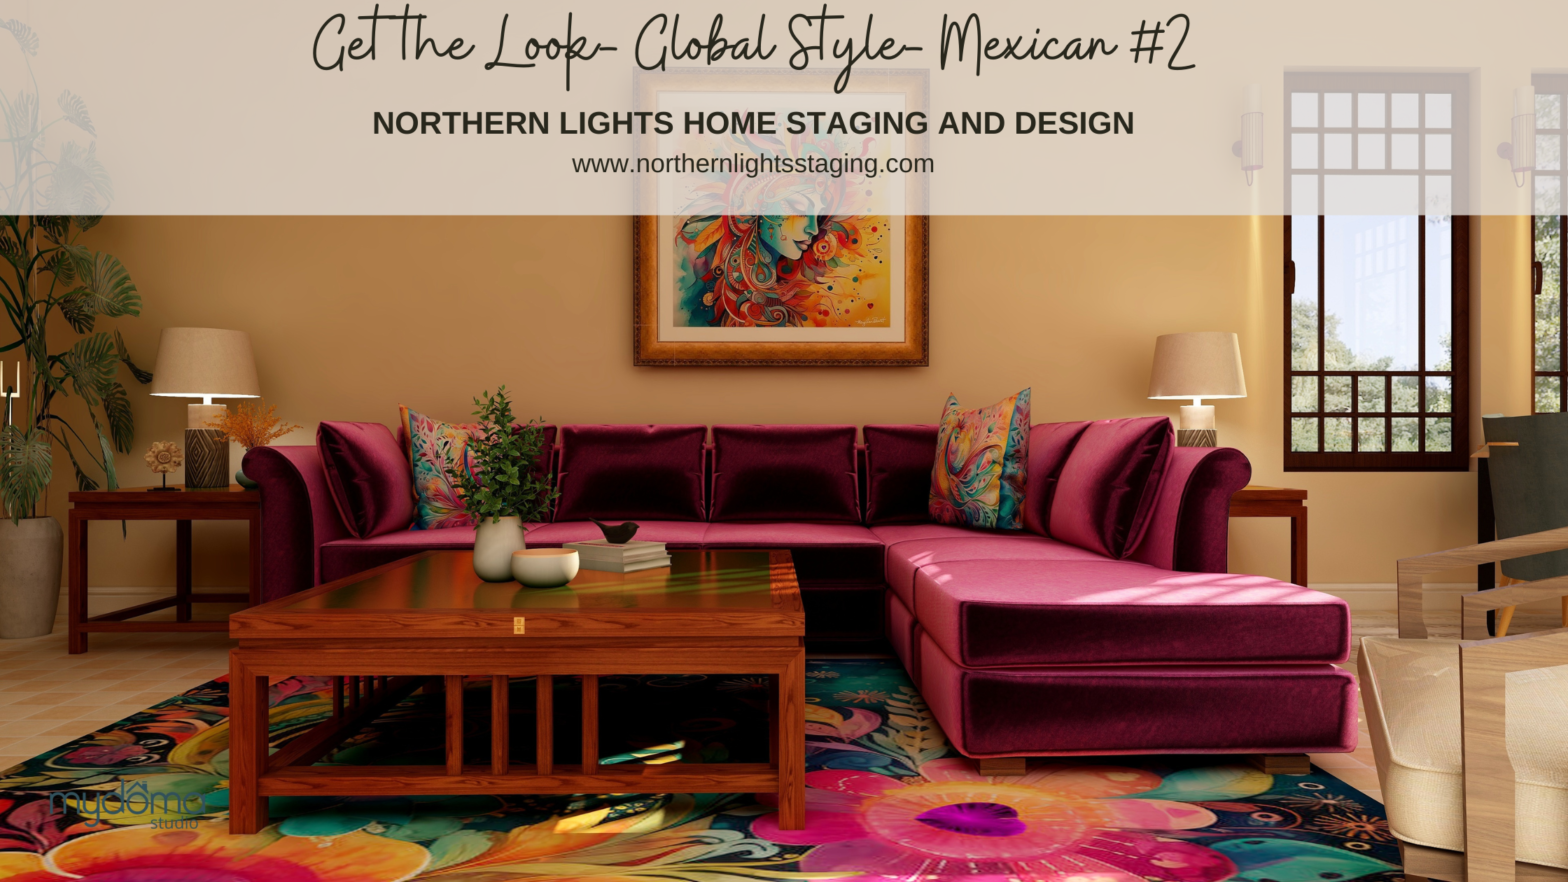 Get the Look- Global Style-Mexican #2